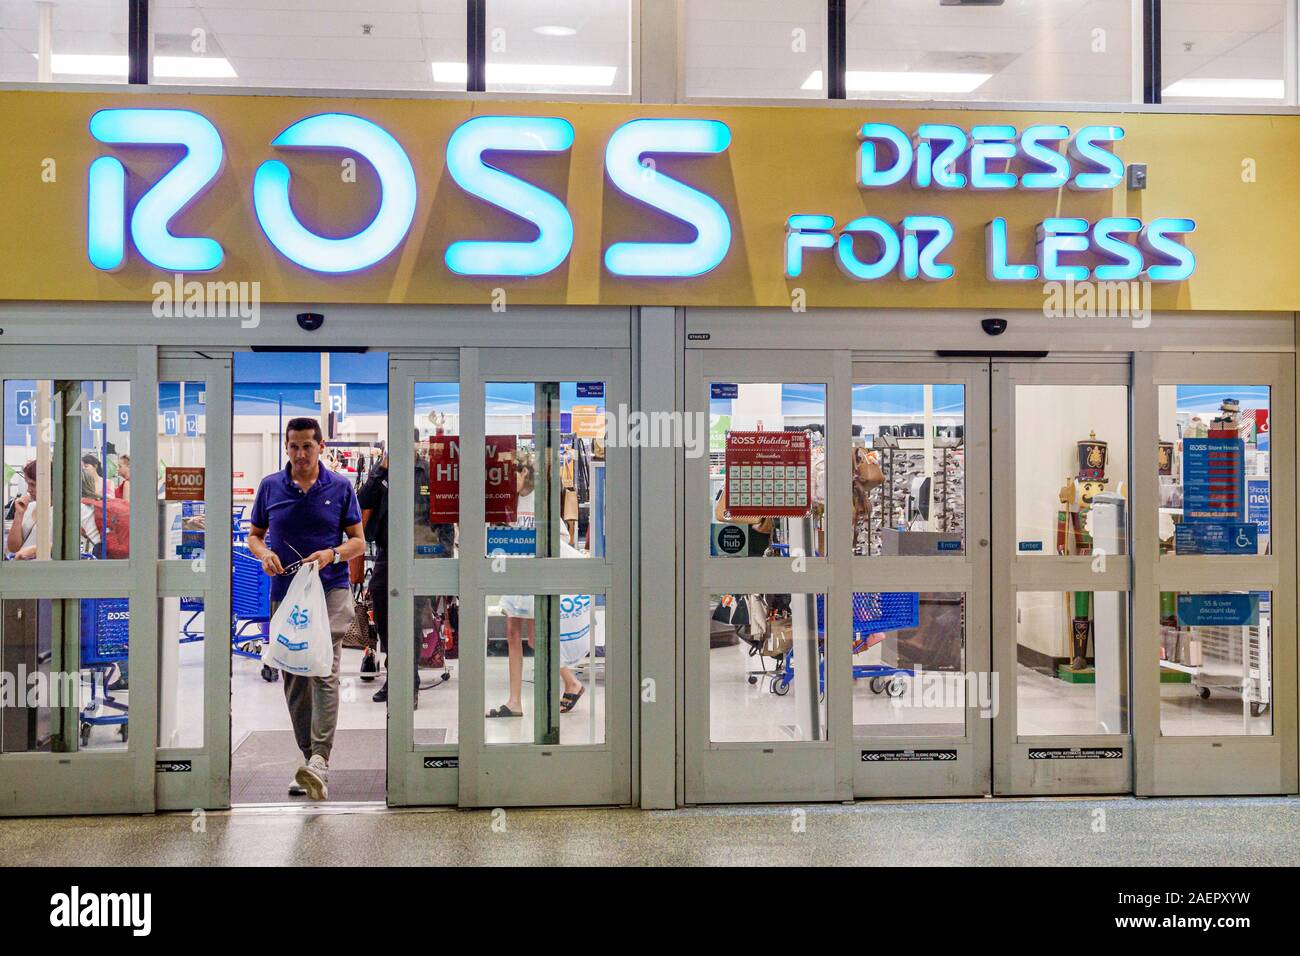 ross dress for less miami